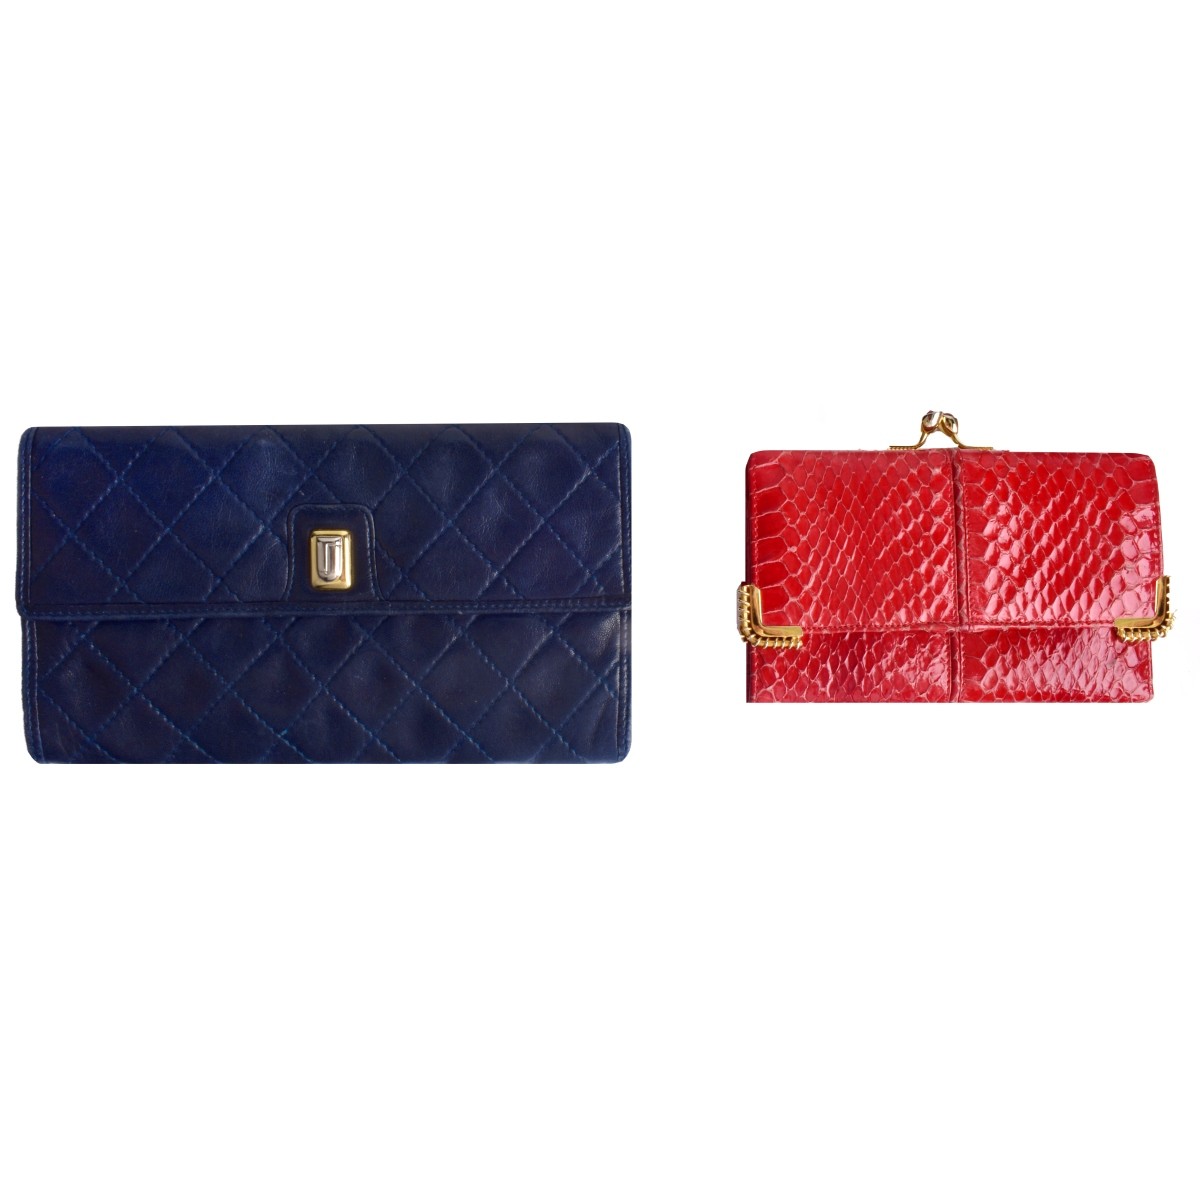 Two Judith Leiber Wallets